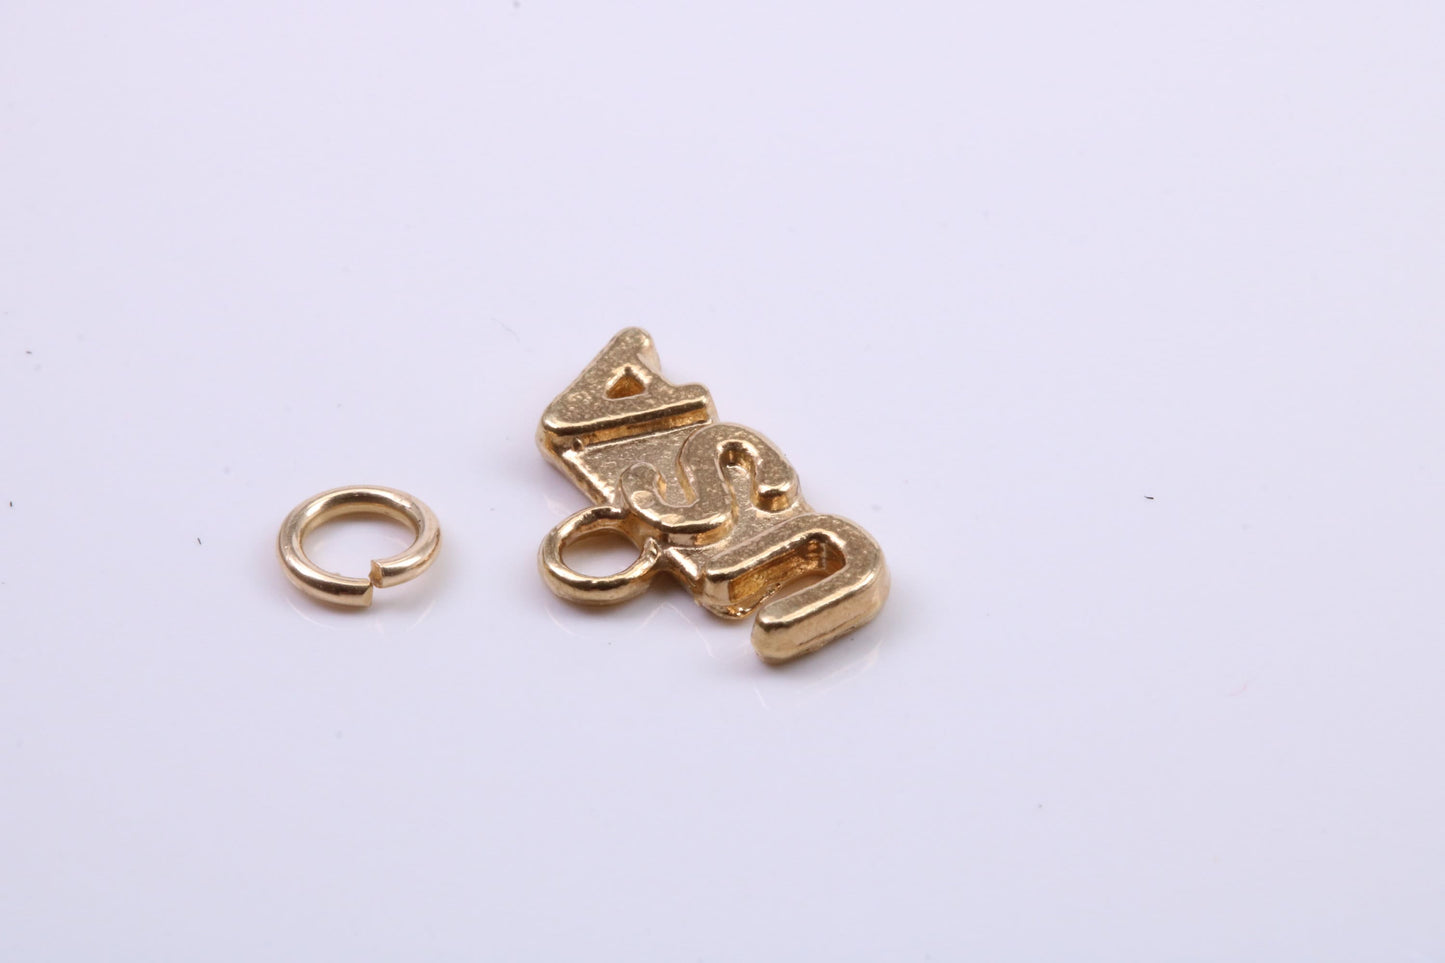 USA Charm, Traditional Charm, Made from Solid 9ct Yellow Gold, British Hallmarked, Complete with Attachment Link